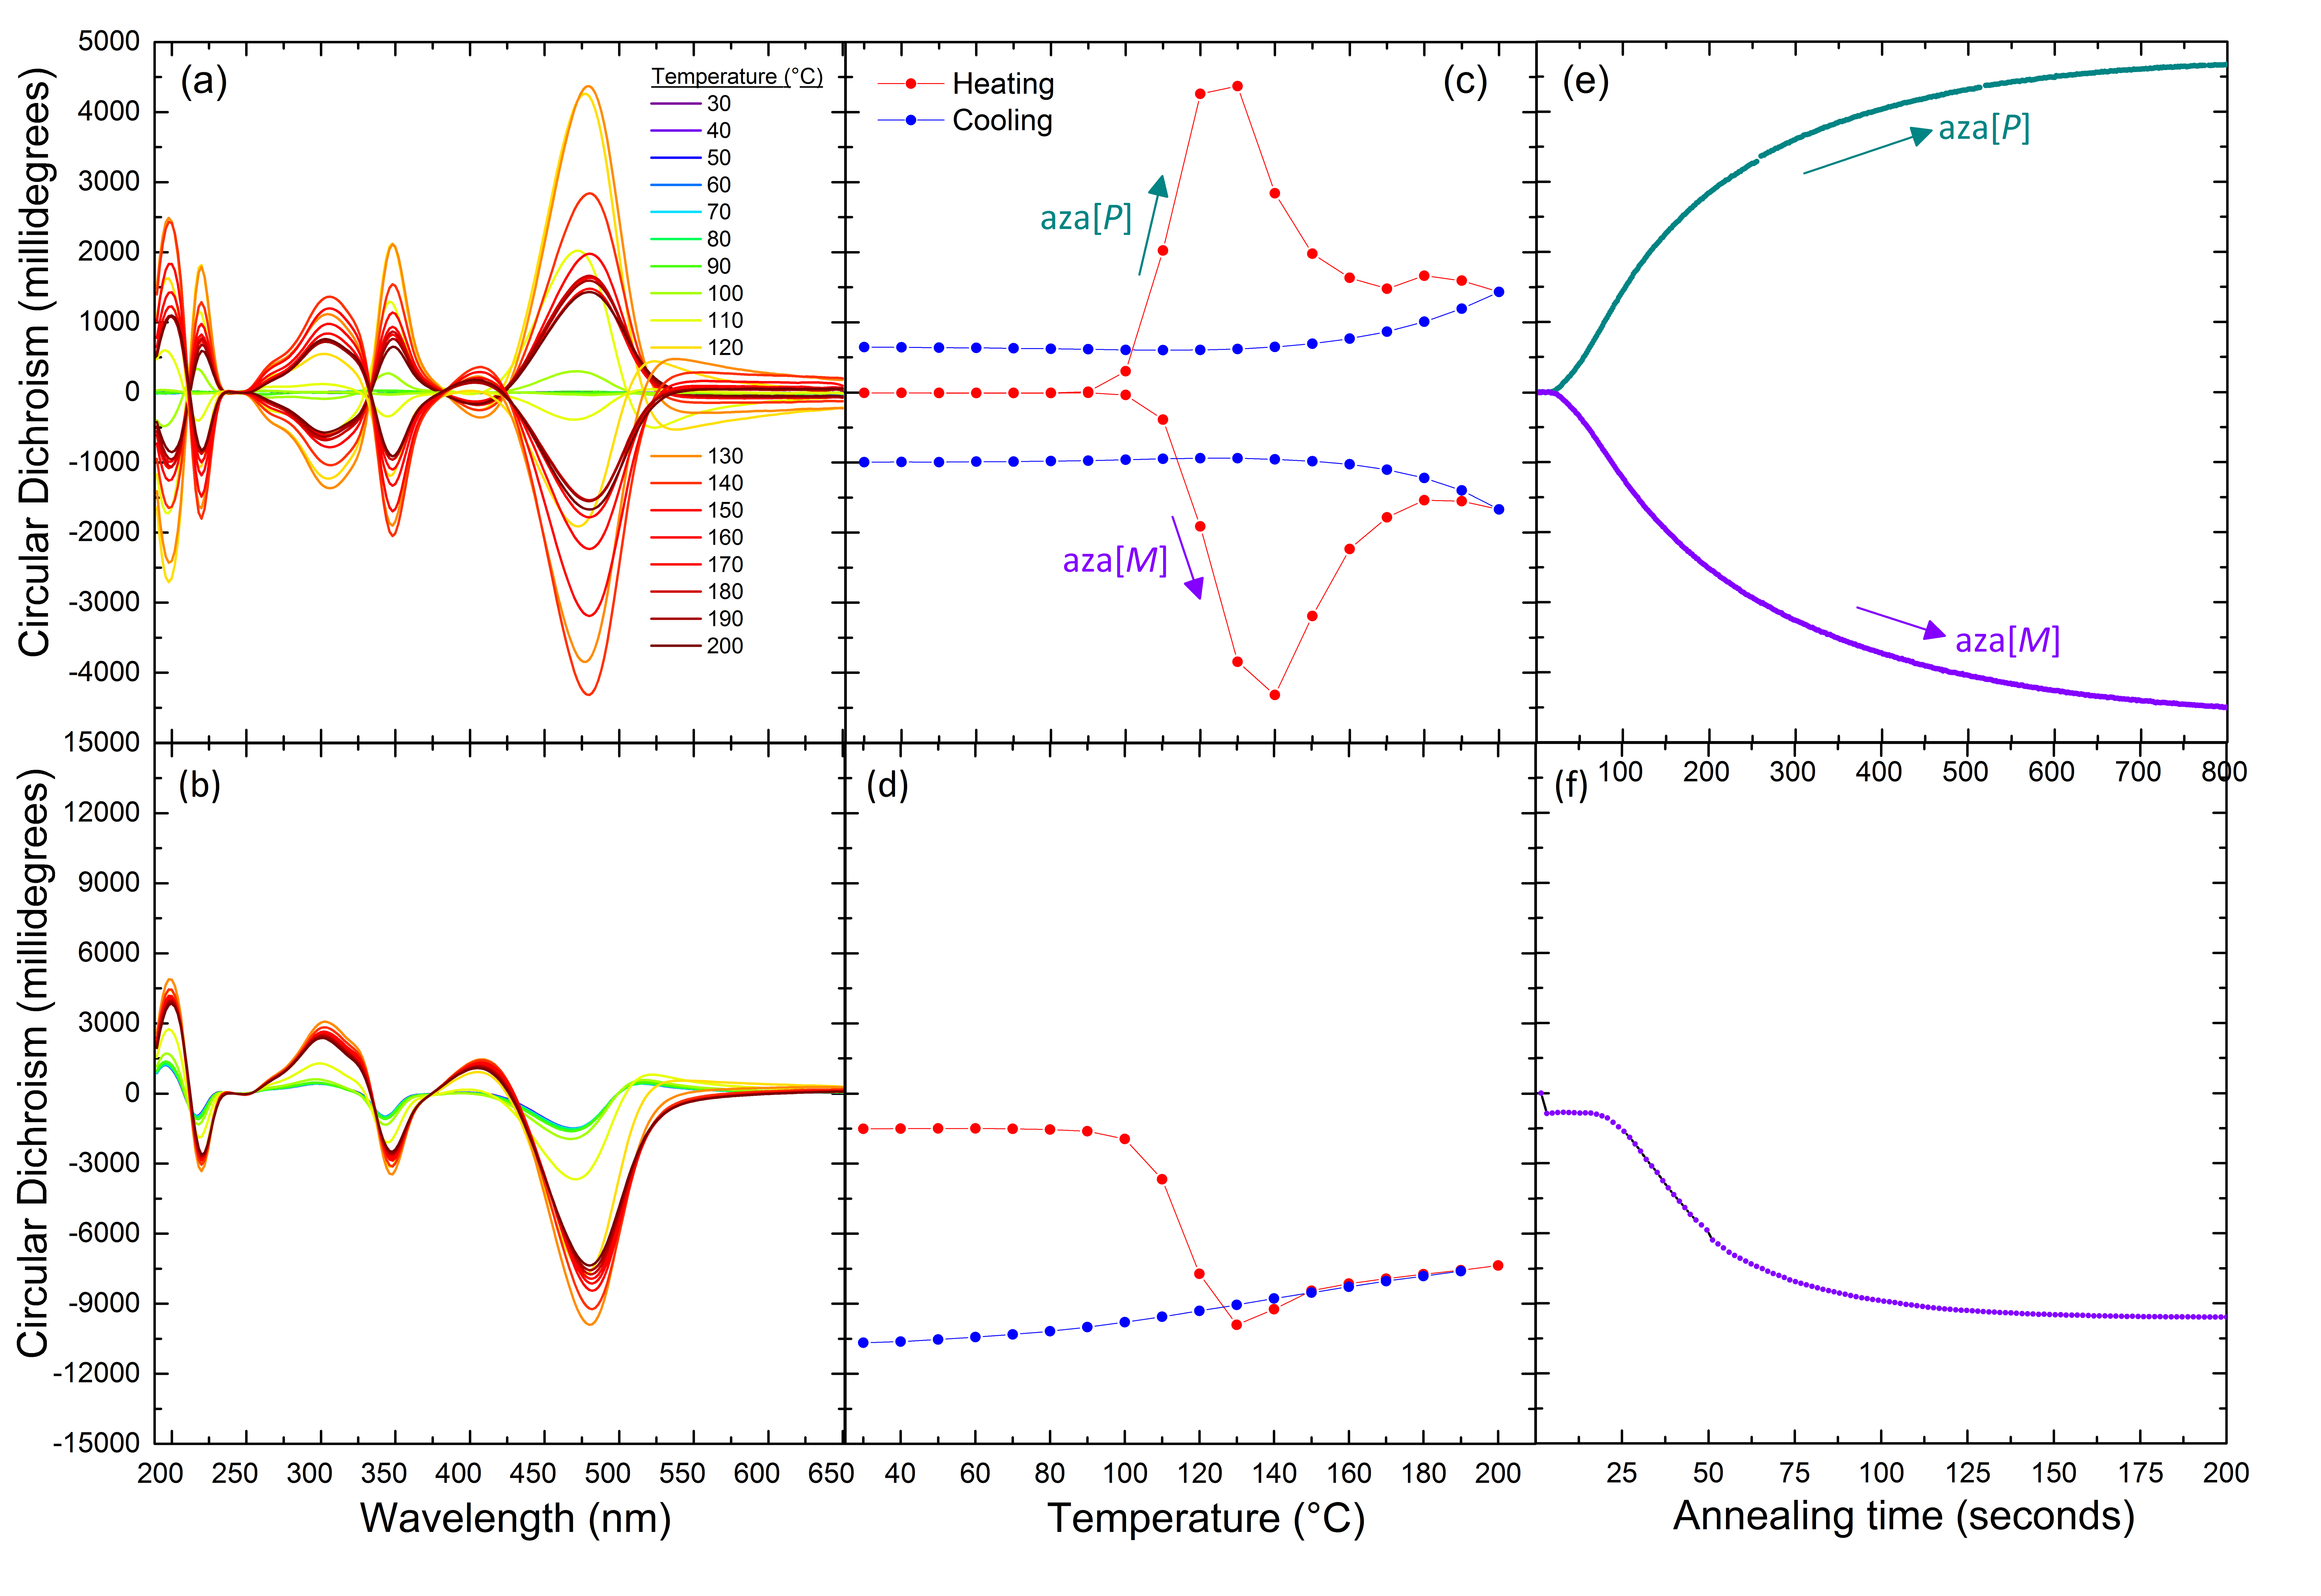 Figure 2 from published paper